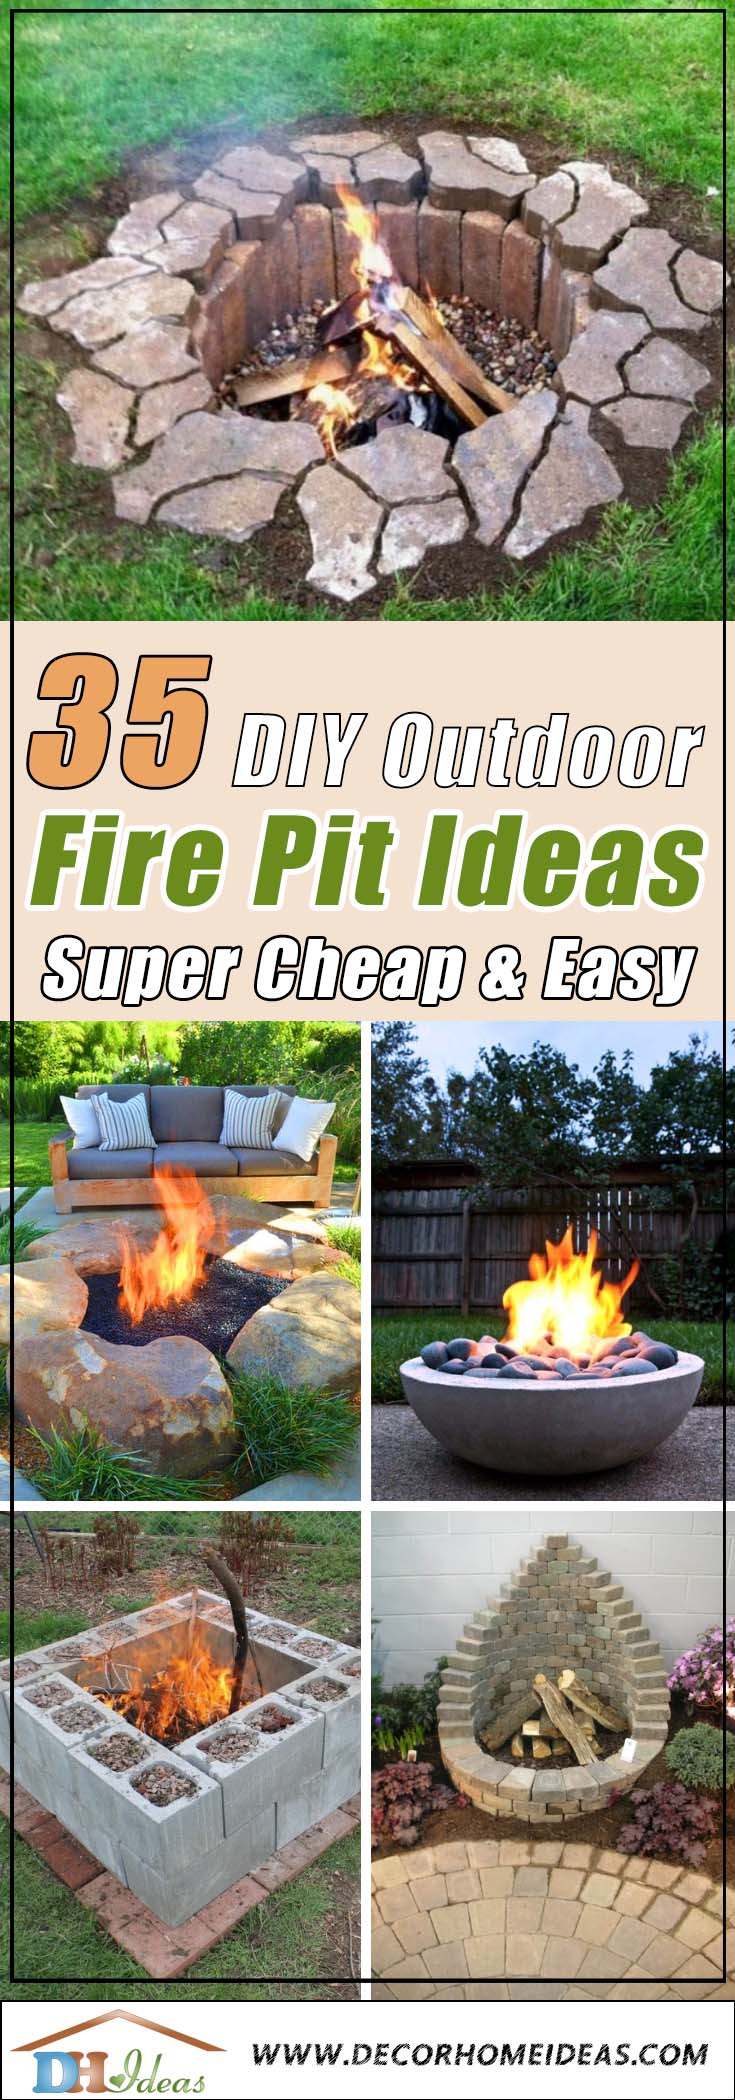 35 Easy To Do Fire Pit Ideas And, How To Build A Small Fire Pit